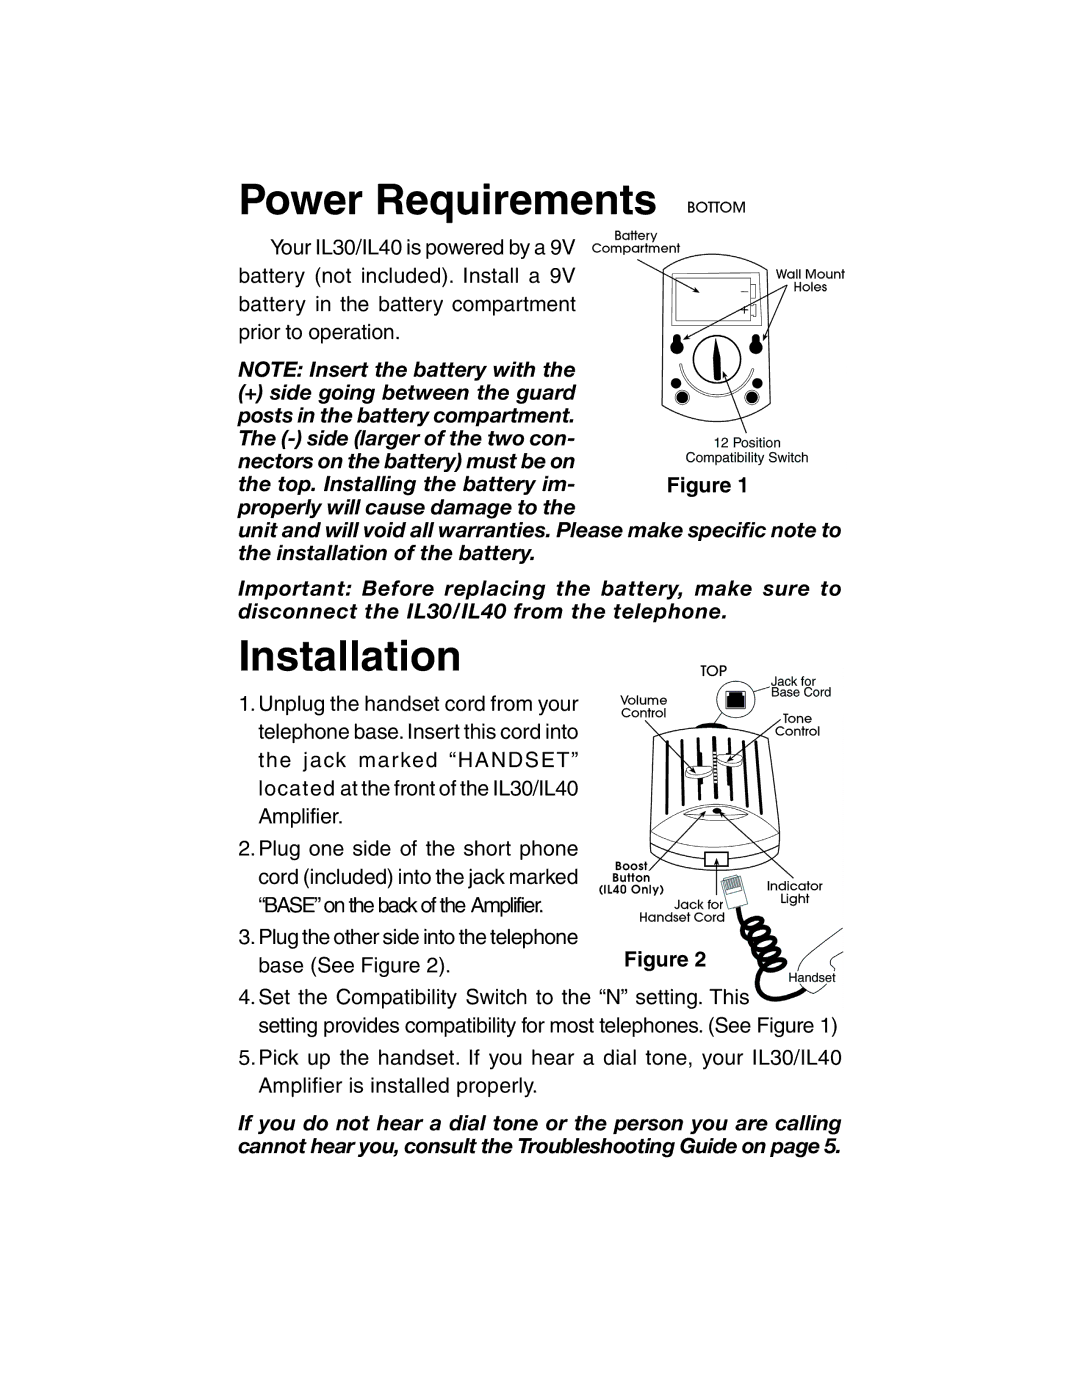 ClearSounds Portable Telephone Amplifier manual Installation 